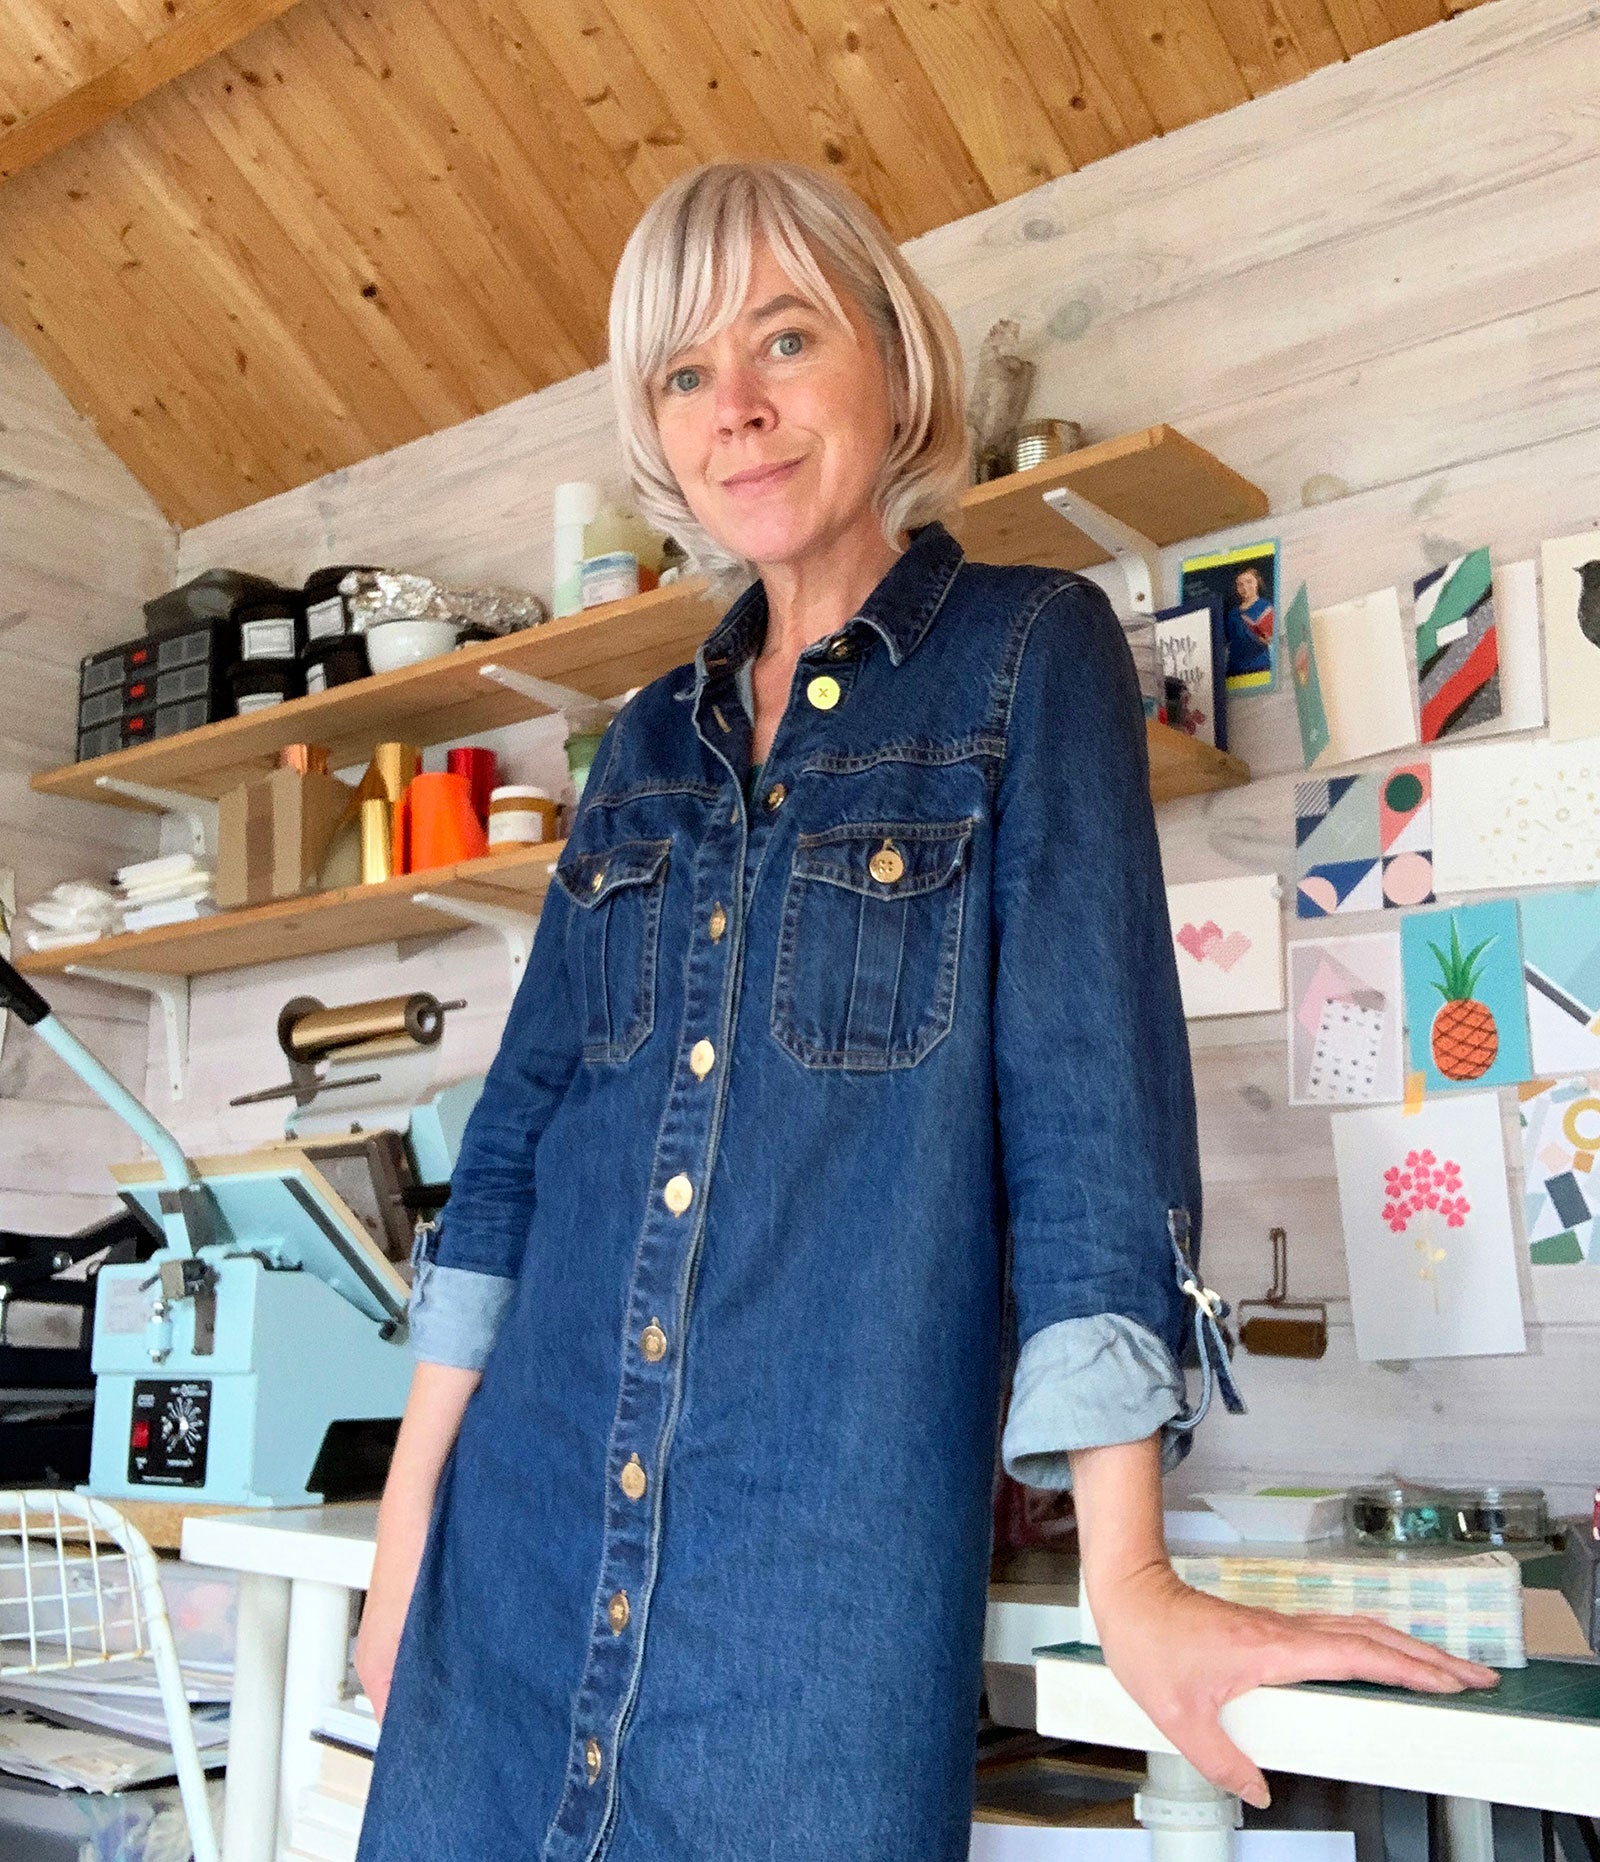 Marley Press founder Maggie Marley pictured in her letterpress and hotfoil print studio based in Donegal on Ireland Wild Atlantic Way.